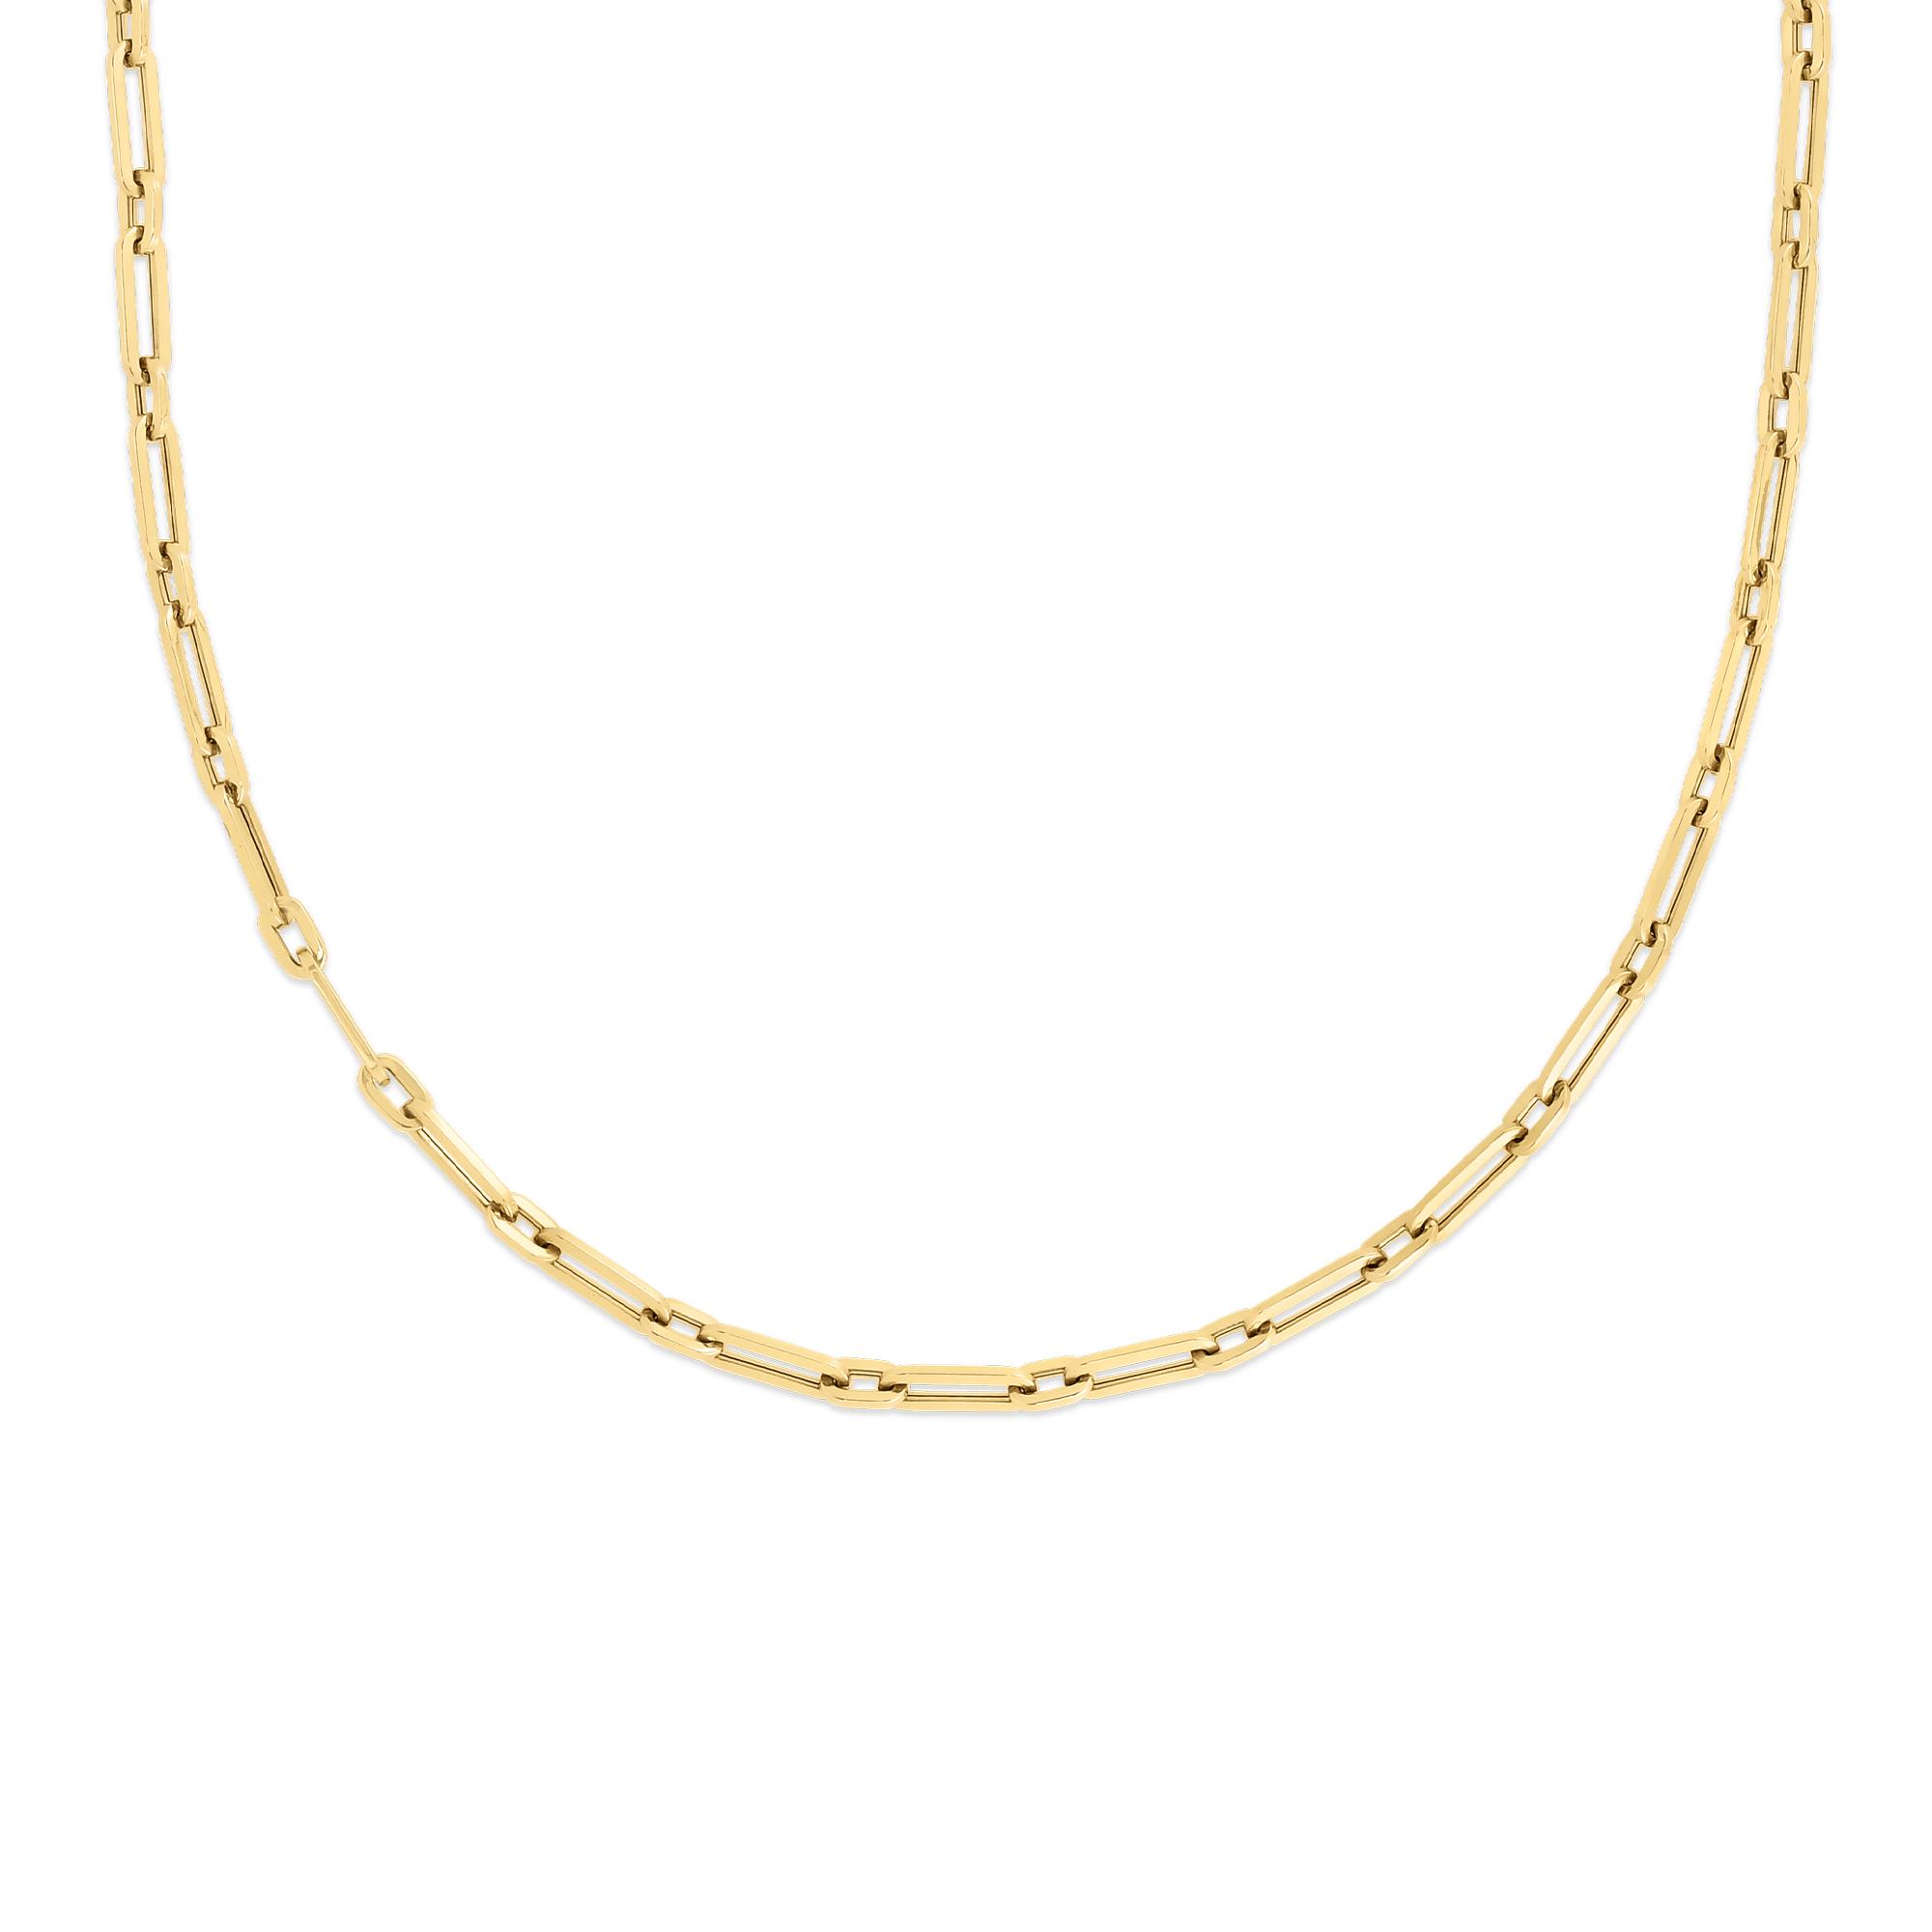 Roberto Coin Riveted Link Chain Necklace, 32 Inches